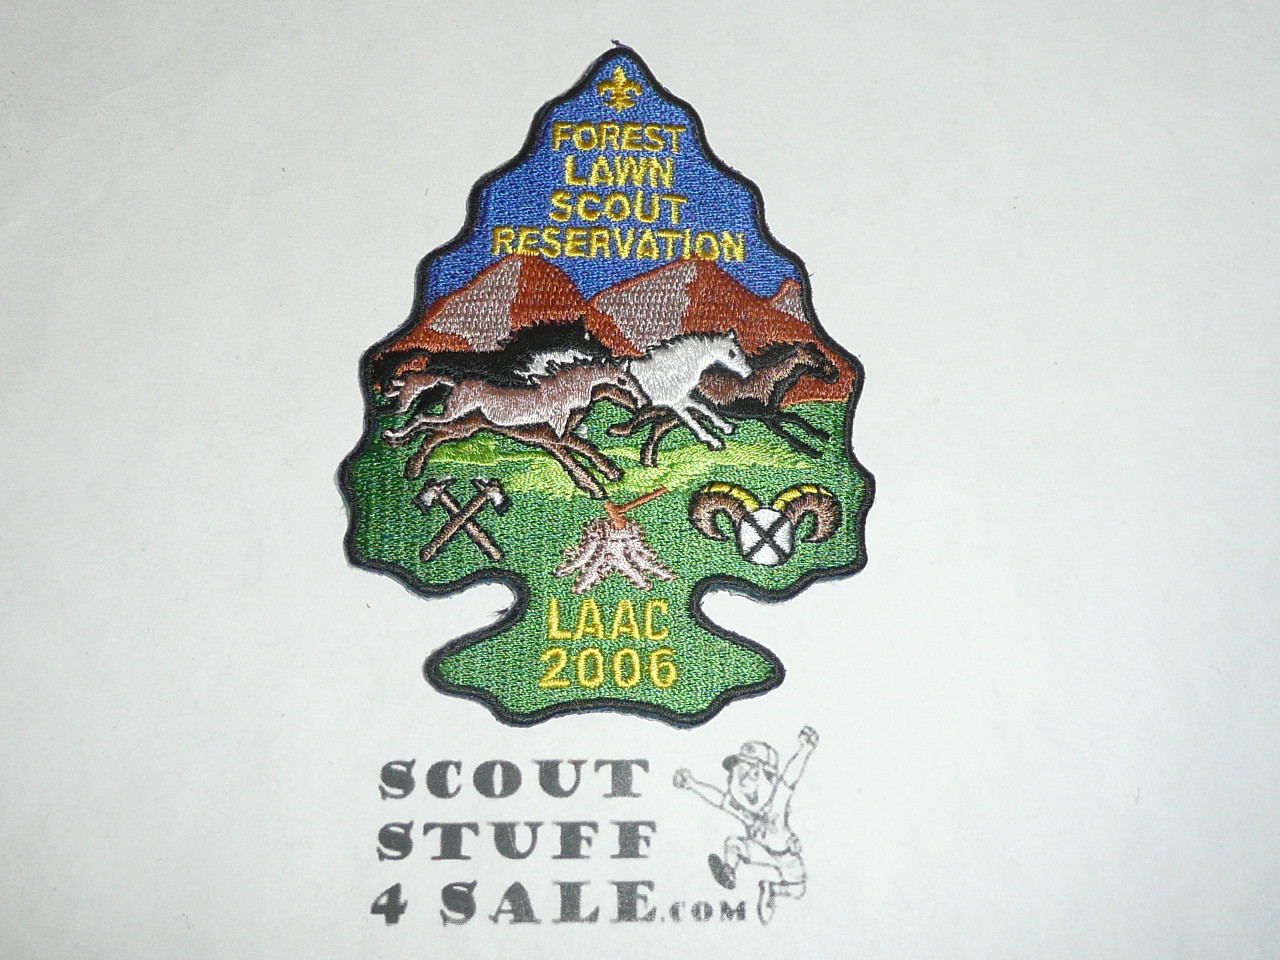 Forest Lawn Scout Reservation STAFF Patch, LAAC, 2006